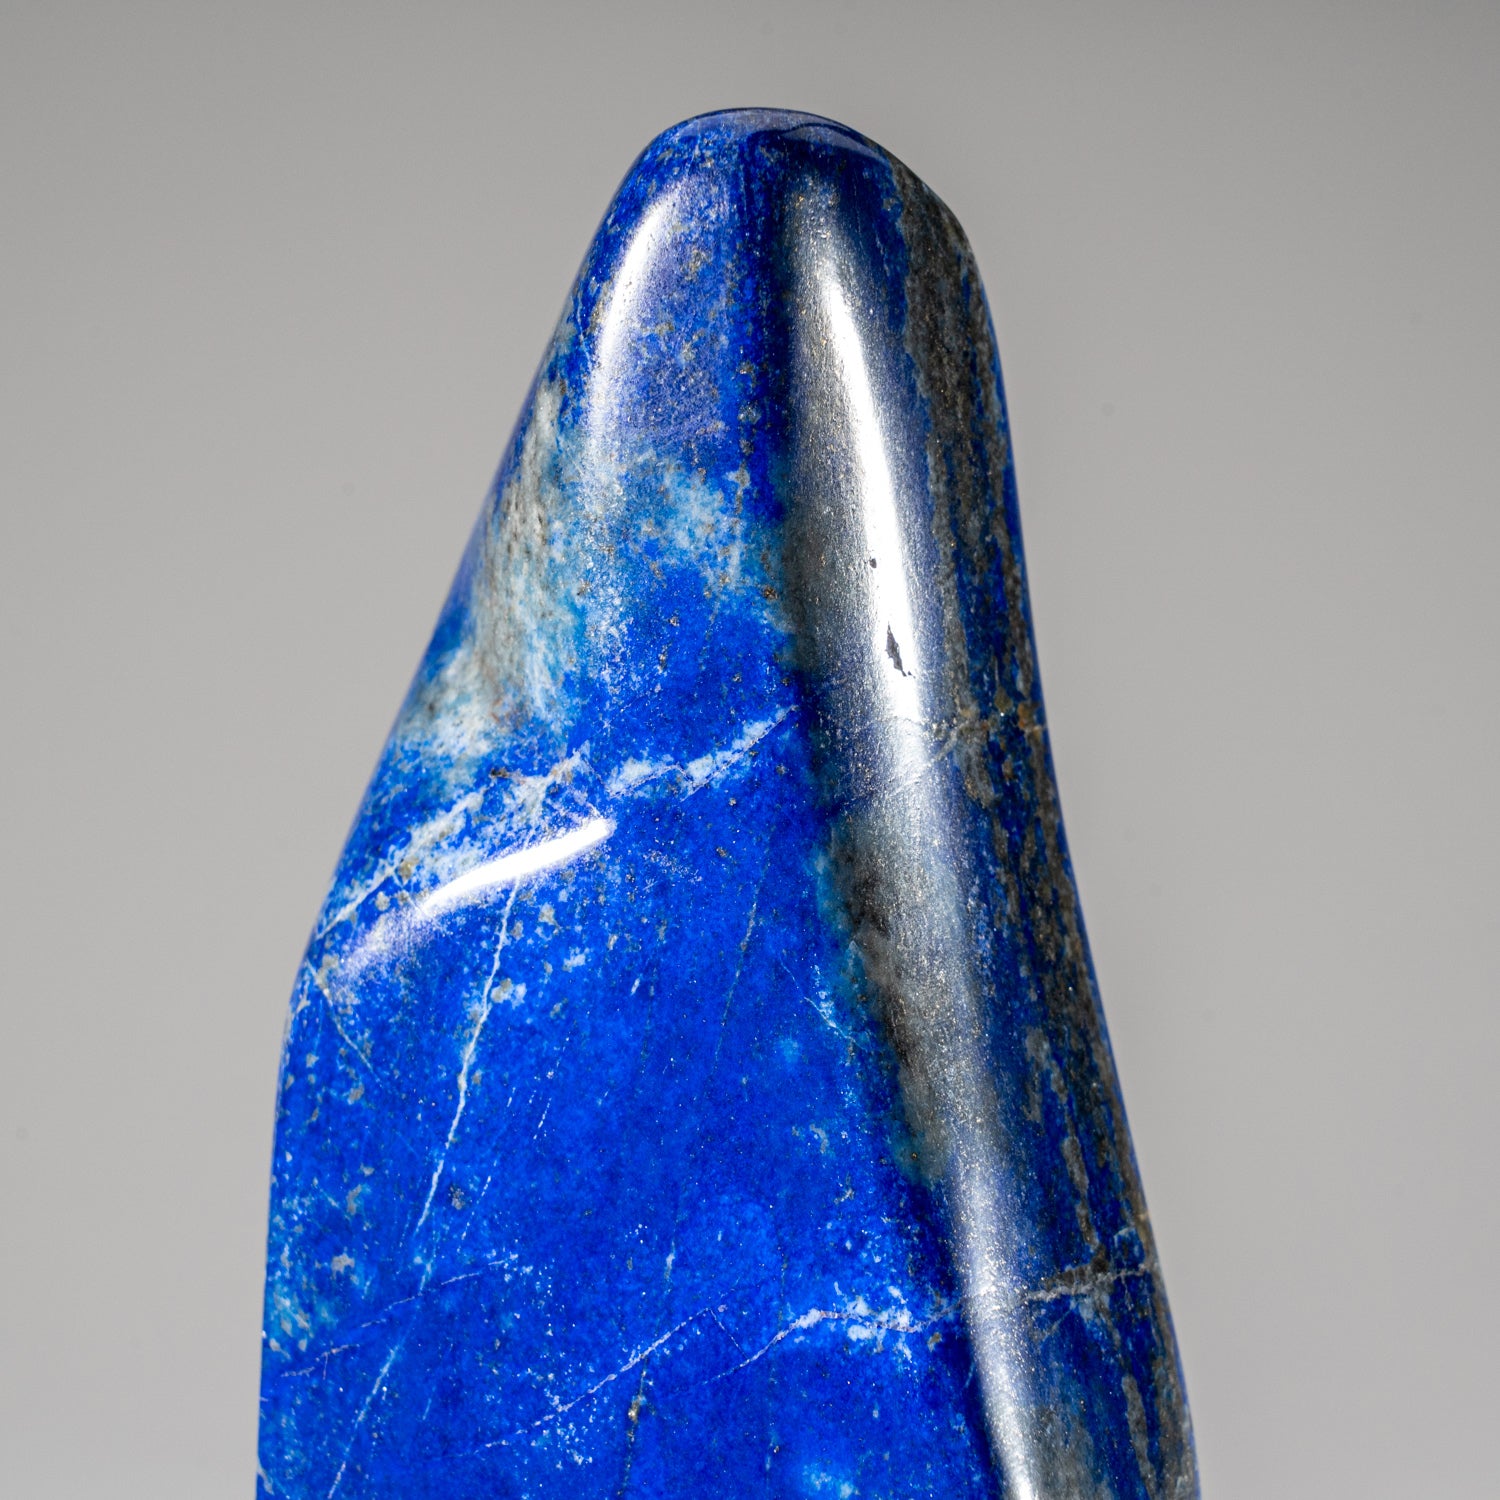 Polished Lapis Lazuli Freeform from Afghanistan (308.6 grams)